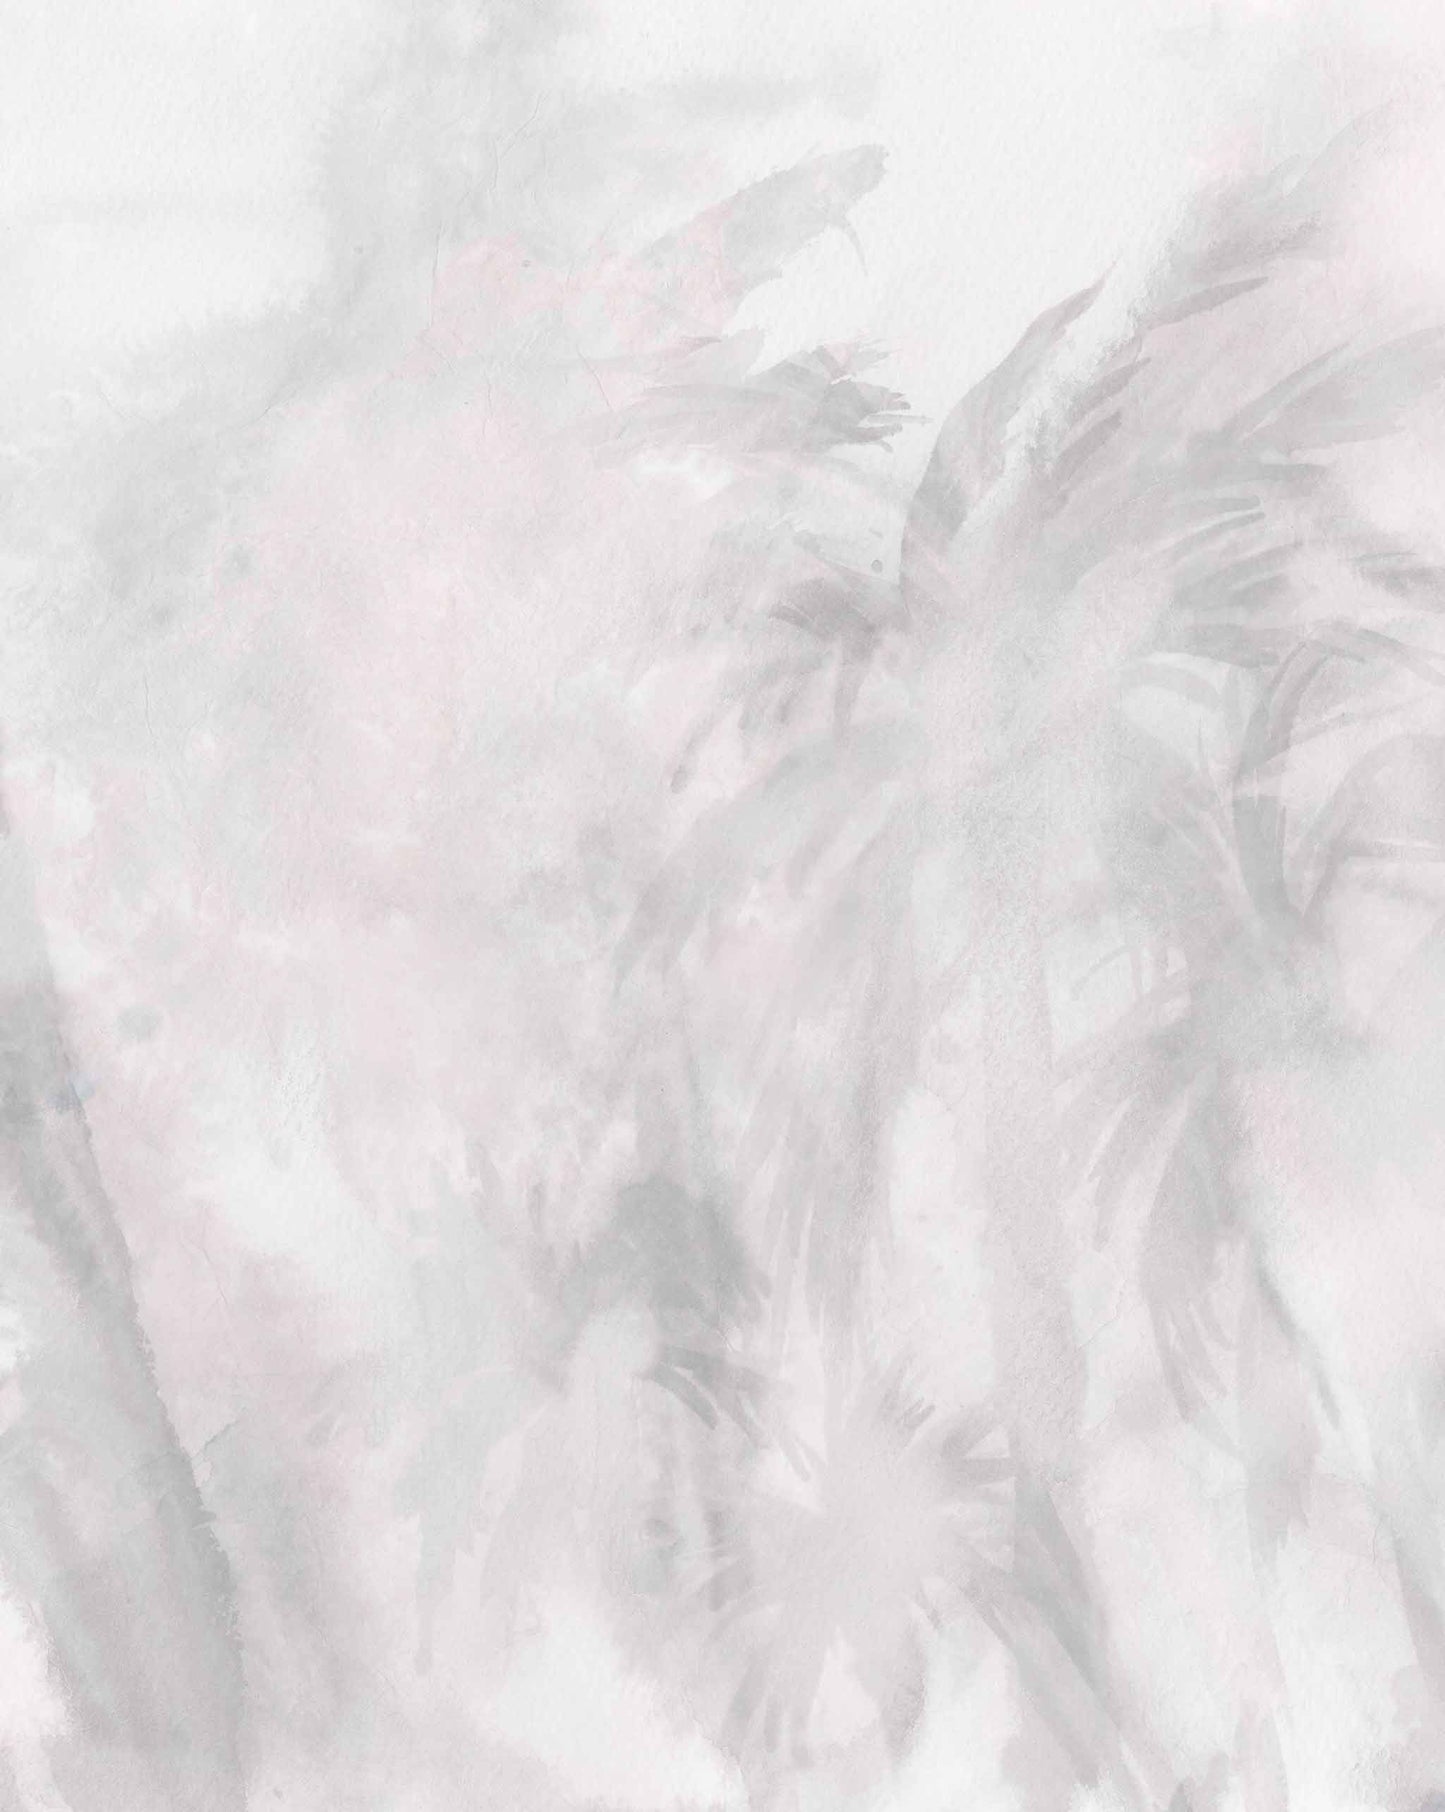 Abstract Reflettere Wallpaper Mural||Alba of blurred palm trees in soft shades of pink and gray, evoking the serene ambiance of Southern California.